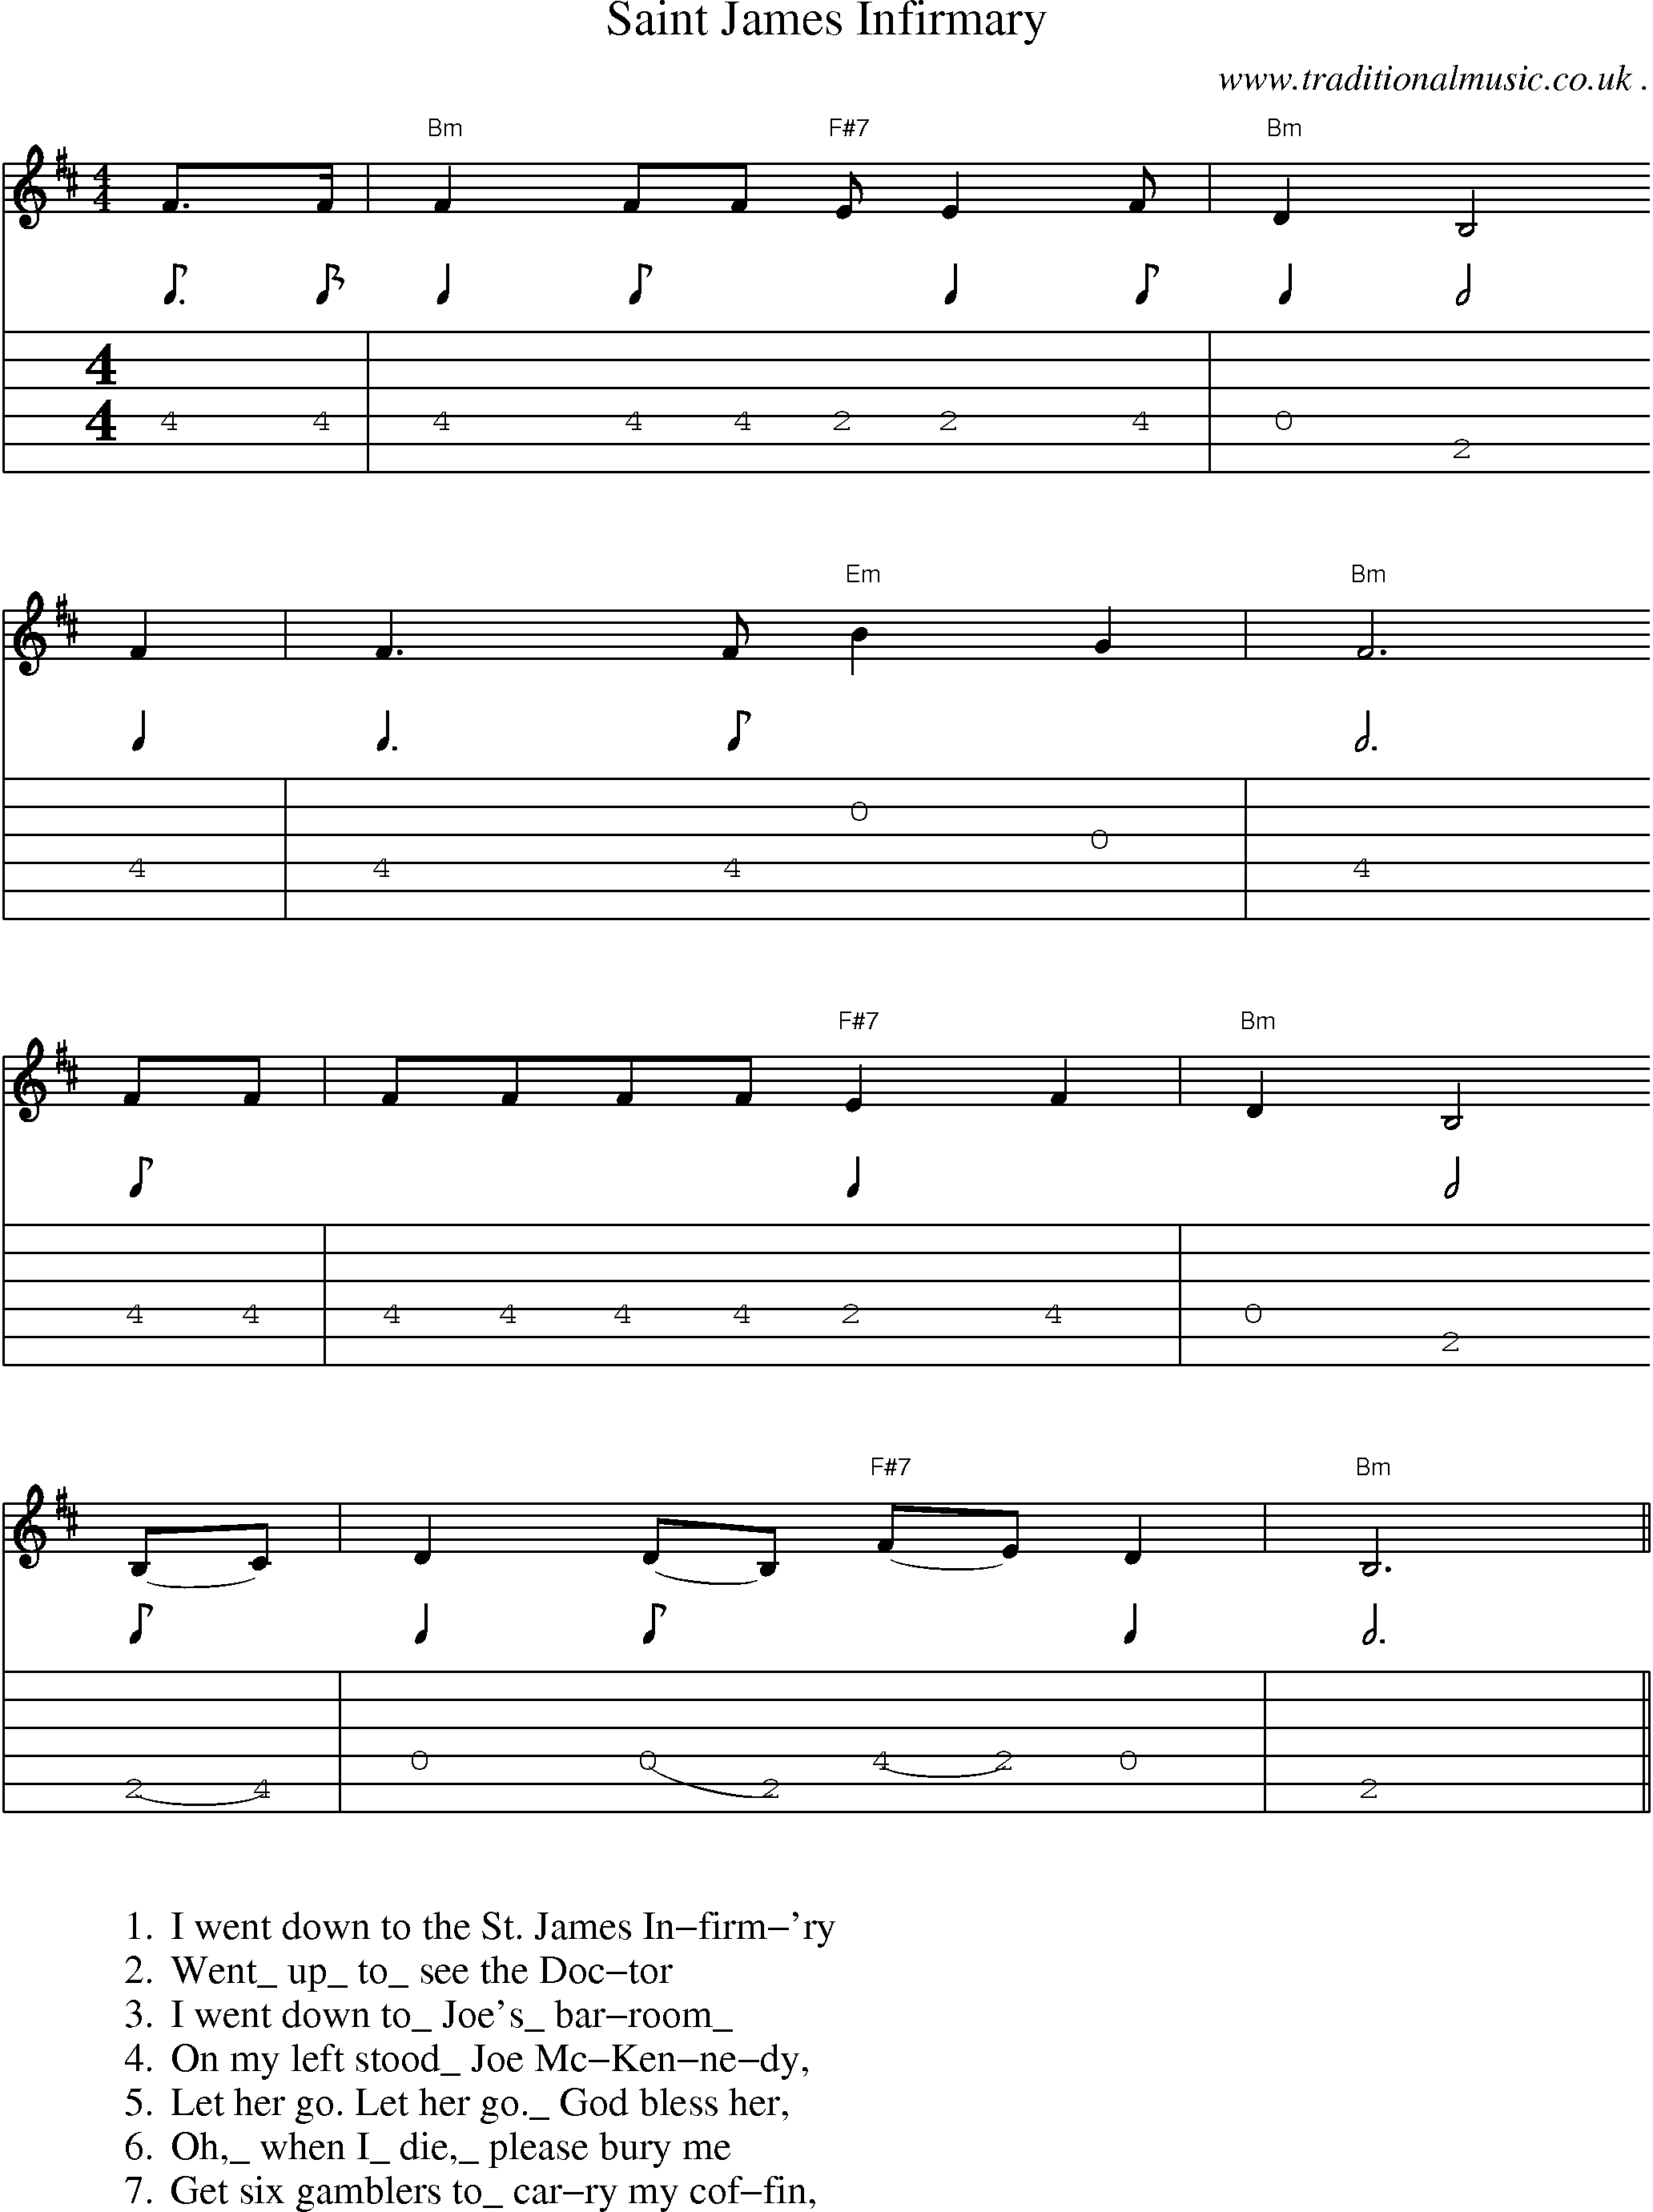 Music Score and Guitar Tabs for Saint James Infirmary